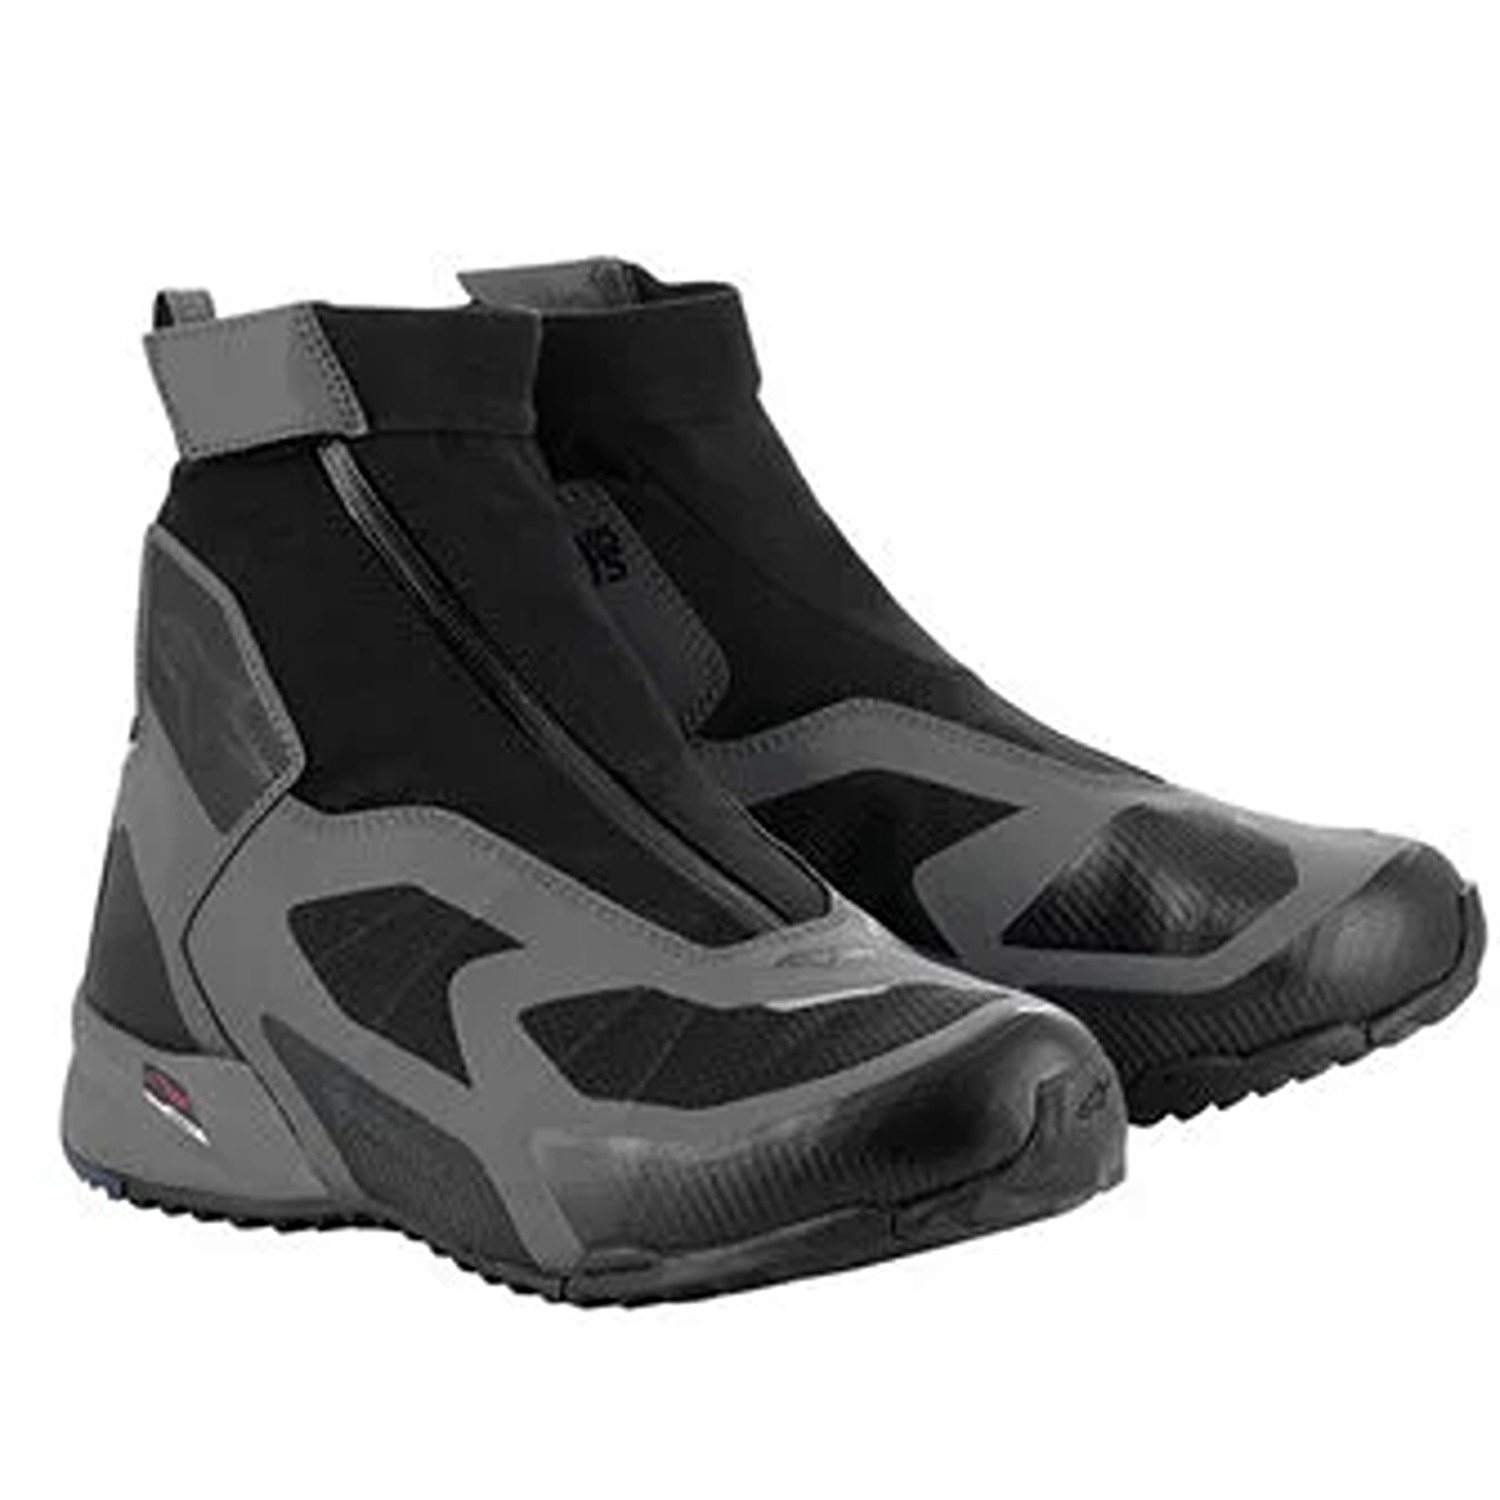 Image of Alpinestars CR-8 Gore-Tex Shoes Black Mid Gray Bright Red Size US 65 ID 8059347260136